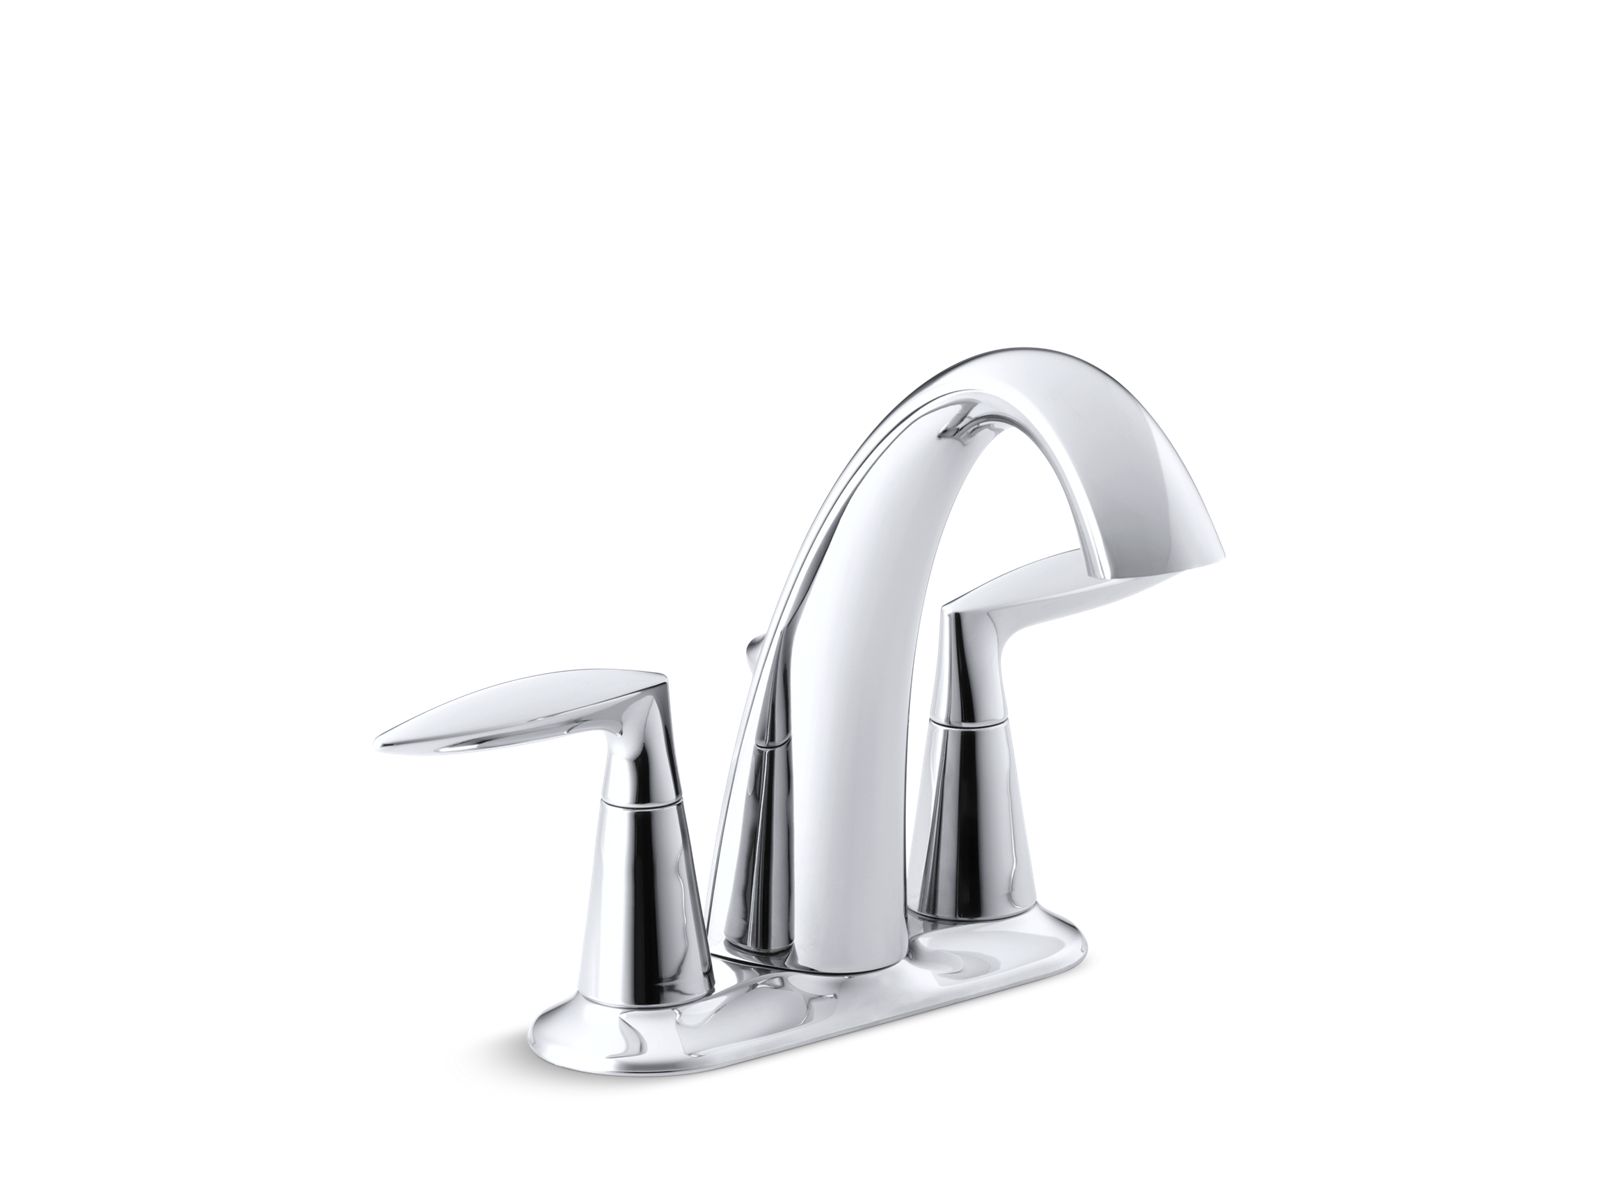 types of pipe for bathroom sink faucet